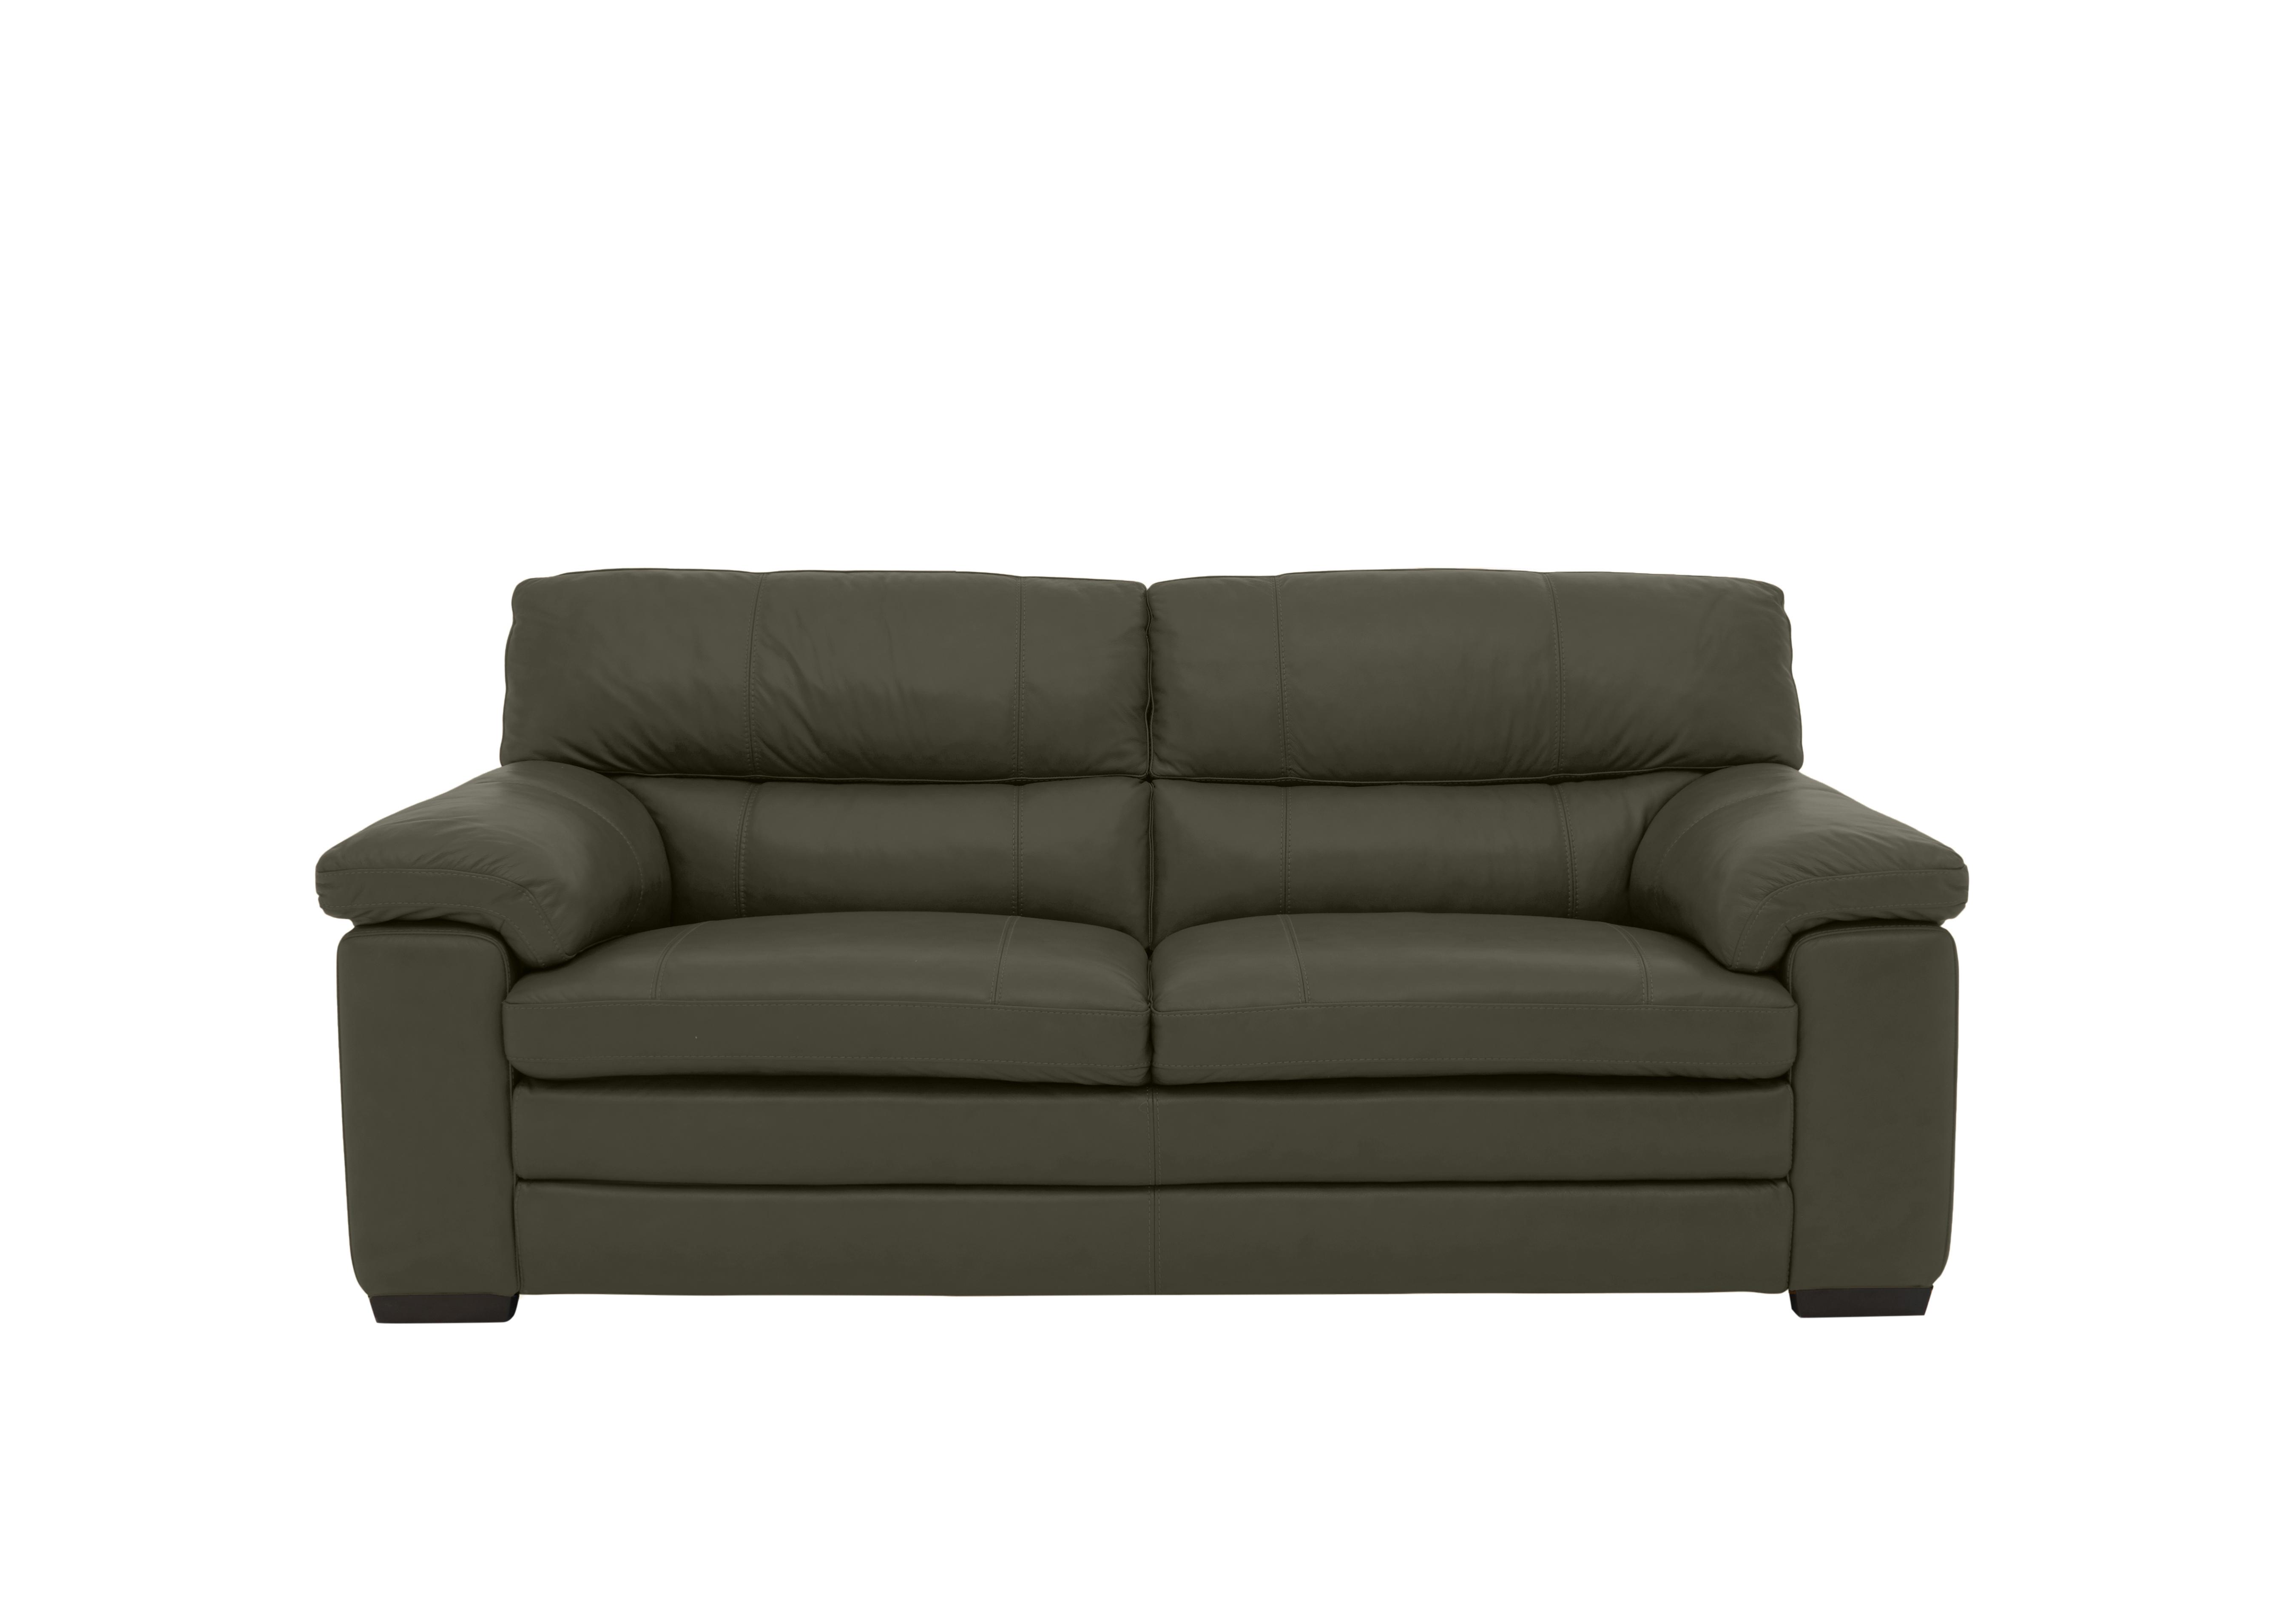 Cozee Leather 2.5 Seater Sofa in Nw-548e Olive on Furniture Village